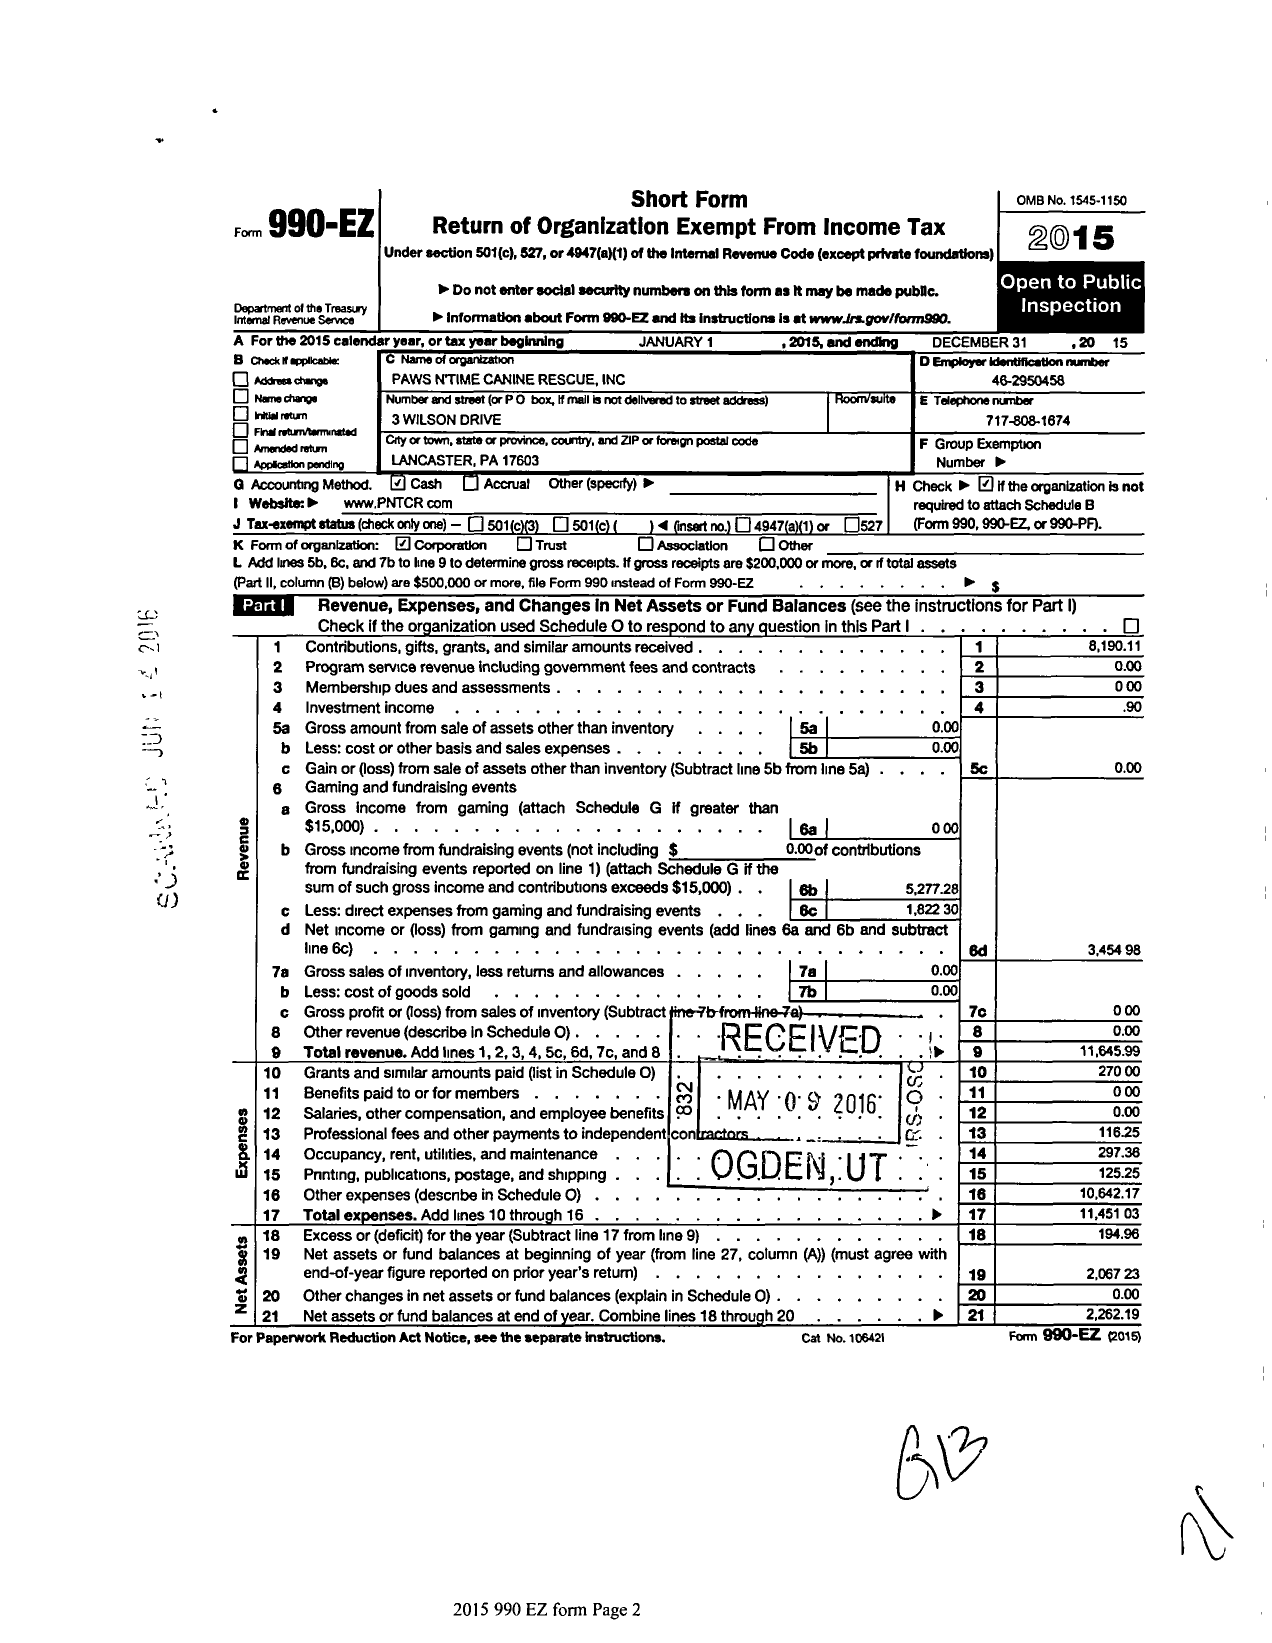 Image of first page of 2015 Form 990EO for Paws N Time Canine Rescue (PNTCR)